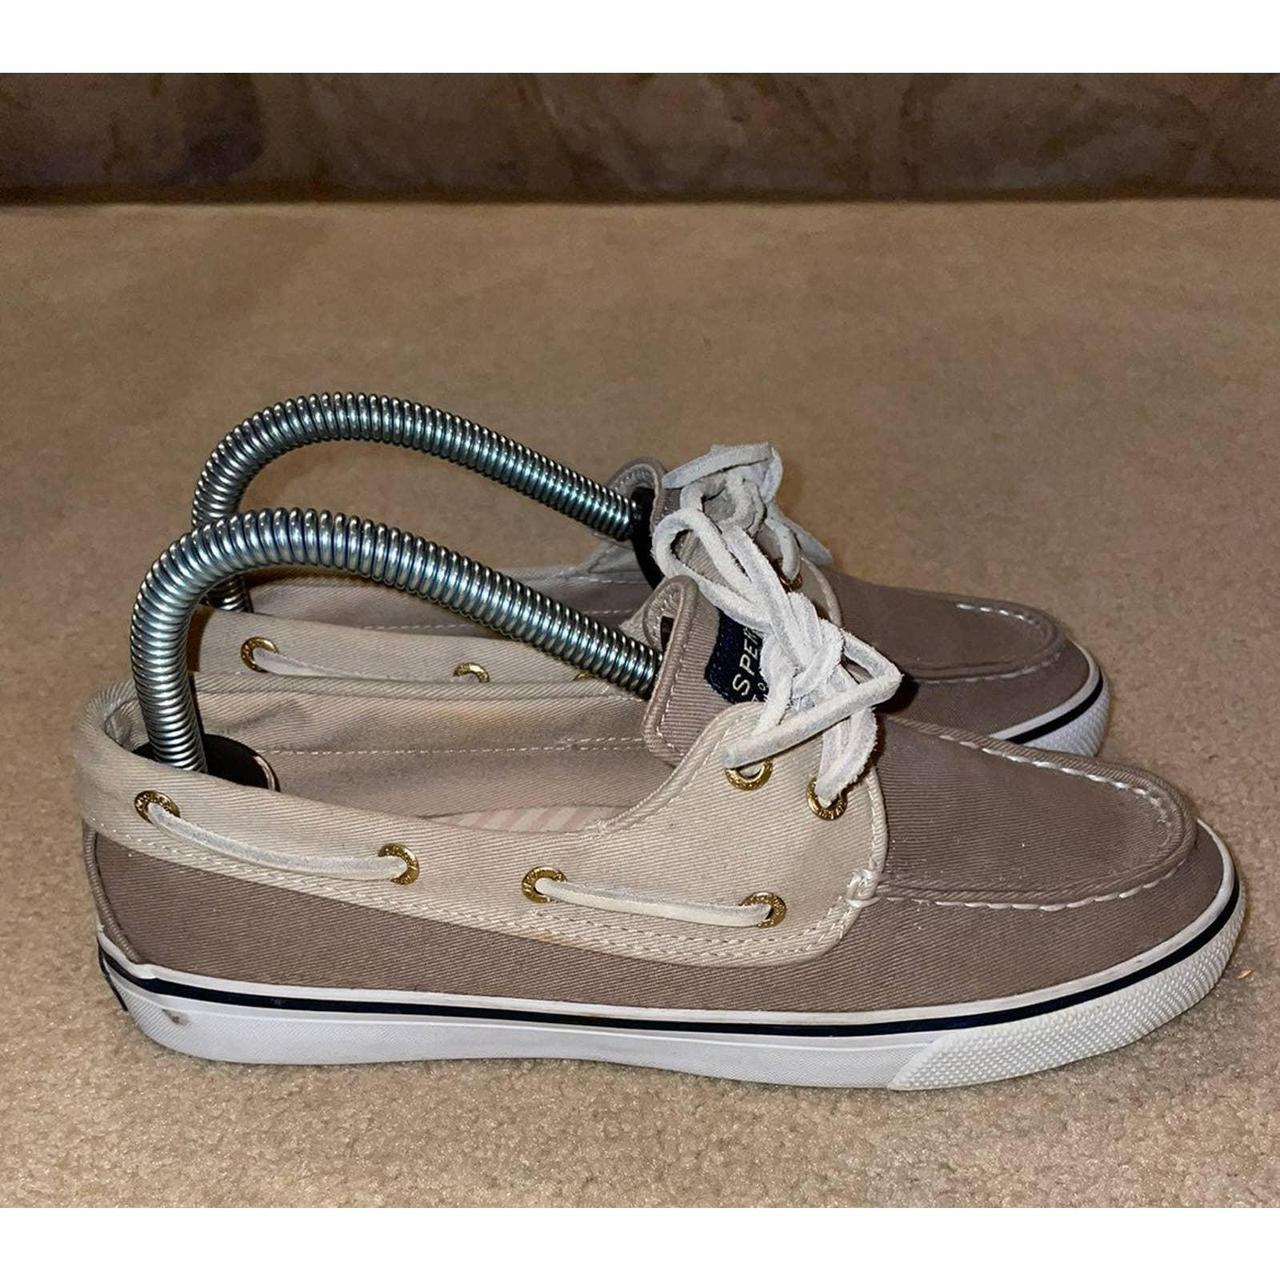 Product Image 1 - Sperry Top Sider Women's Size